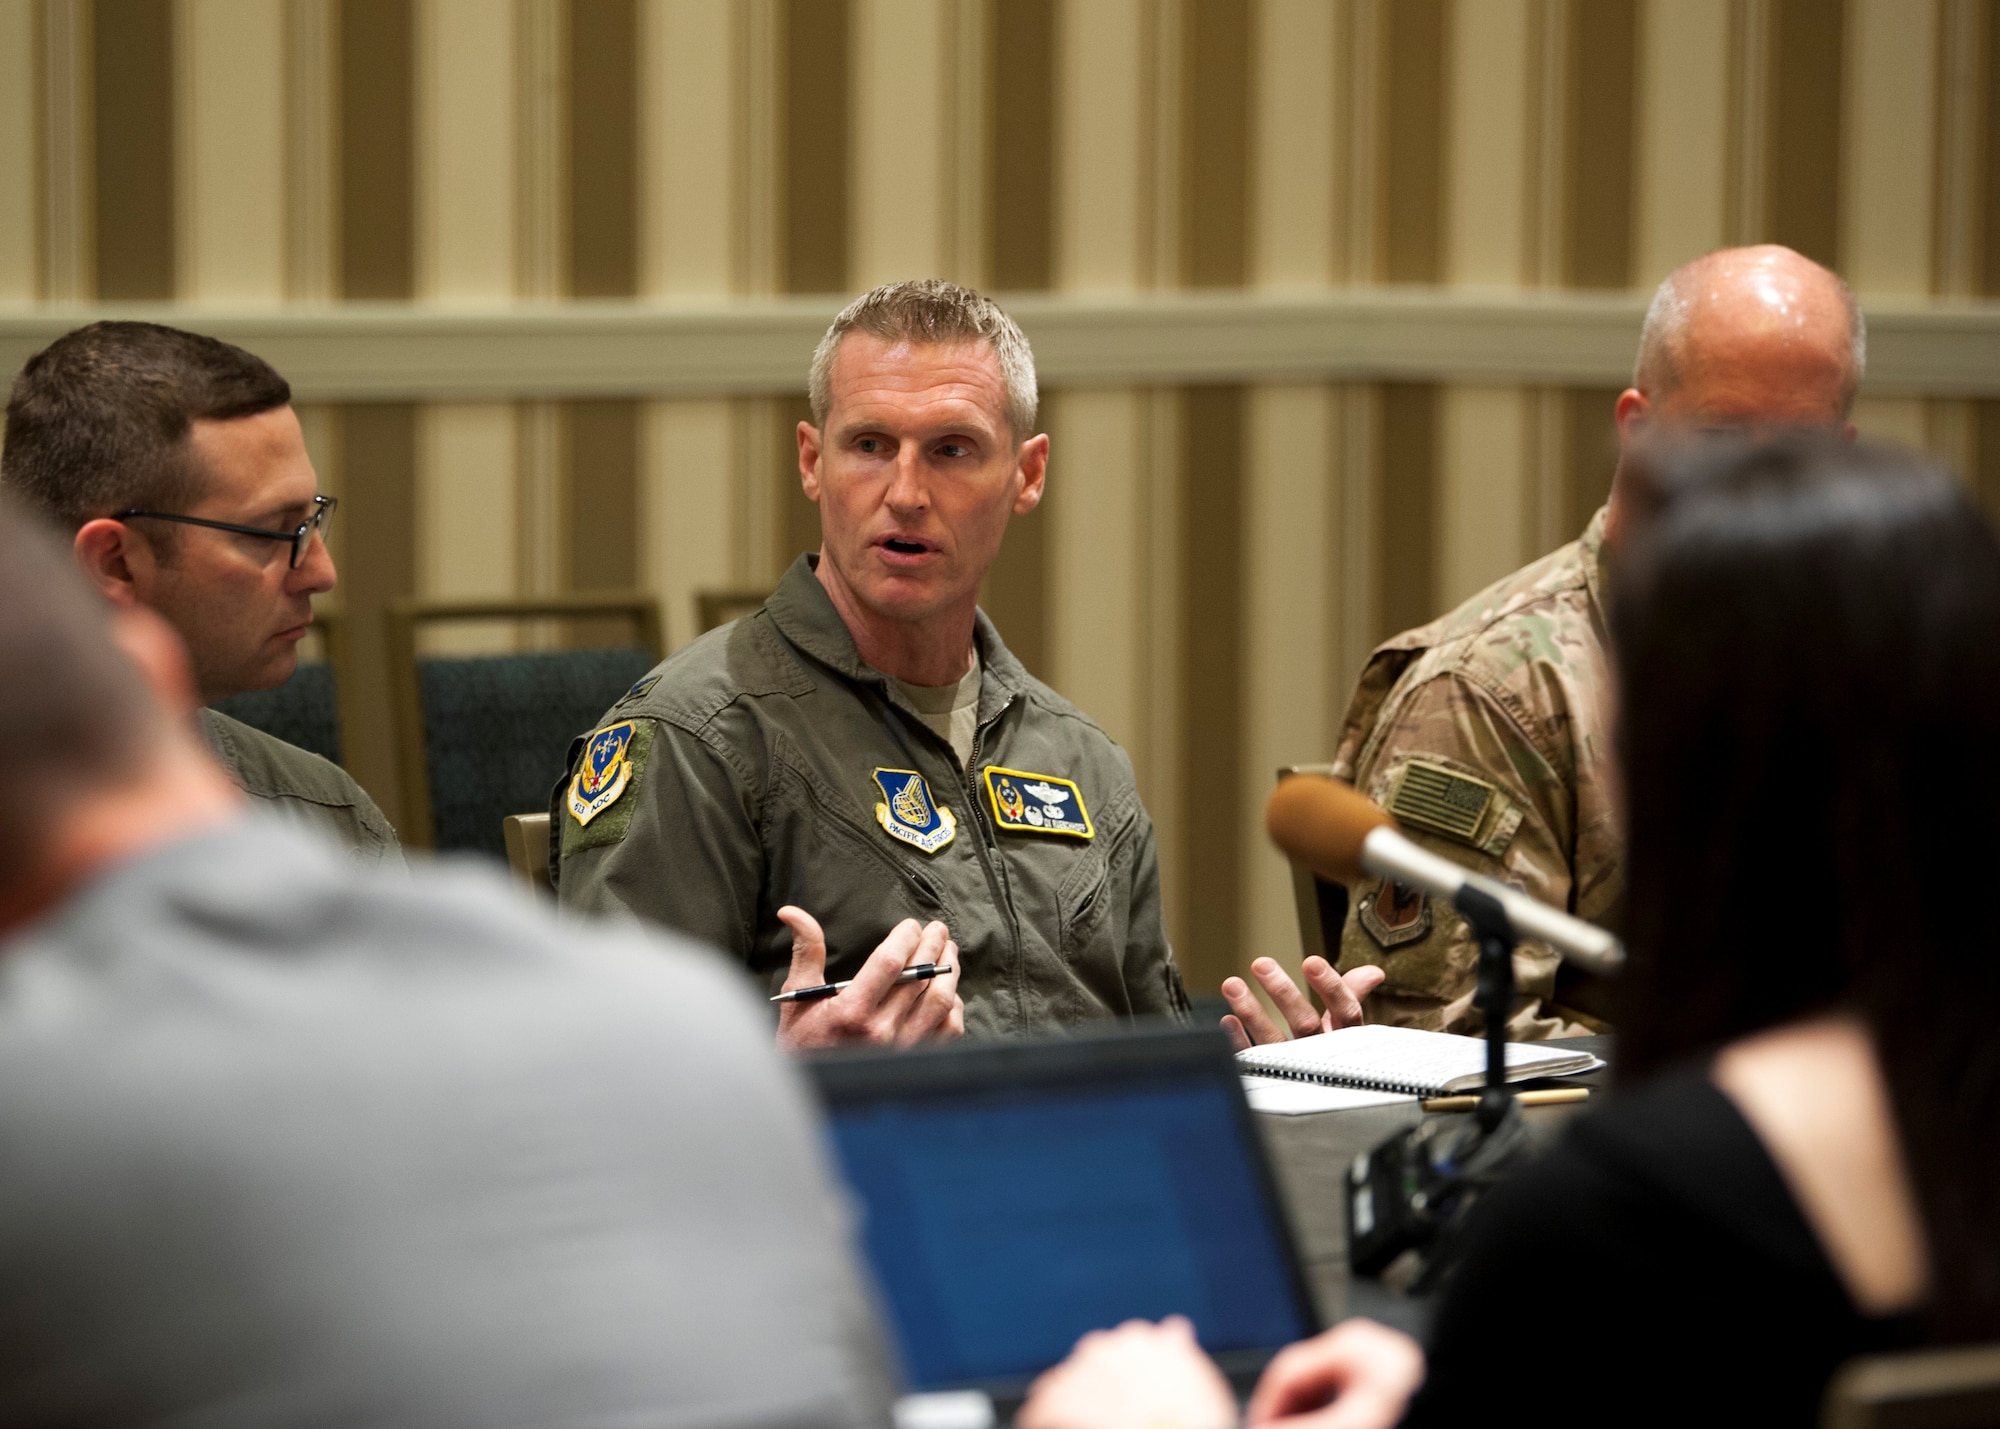 Col. Jason Rueschoff, 613th Air Operations Center commander at Joint Base Pearl Harbor-Hickam, Hawaii, addresses a question during a media roundtable at the Gaylord National Resort and Convention Center in National Harbor, Md., Sept. 17, 2019. Wing commanders from across Pacific Air Forces participated in the roundtable during the 2019 Air Force Association’s Air Space and Cyber Conference. (U.S. Air Force photo by Staff Sgt. Mikaley Kline)